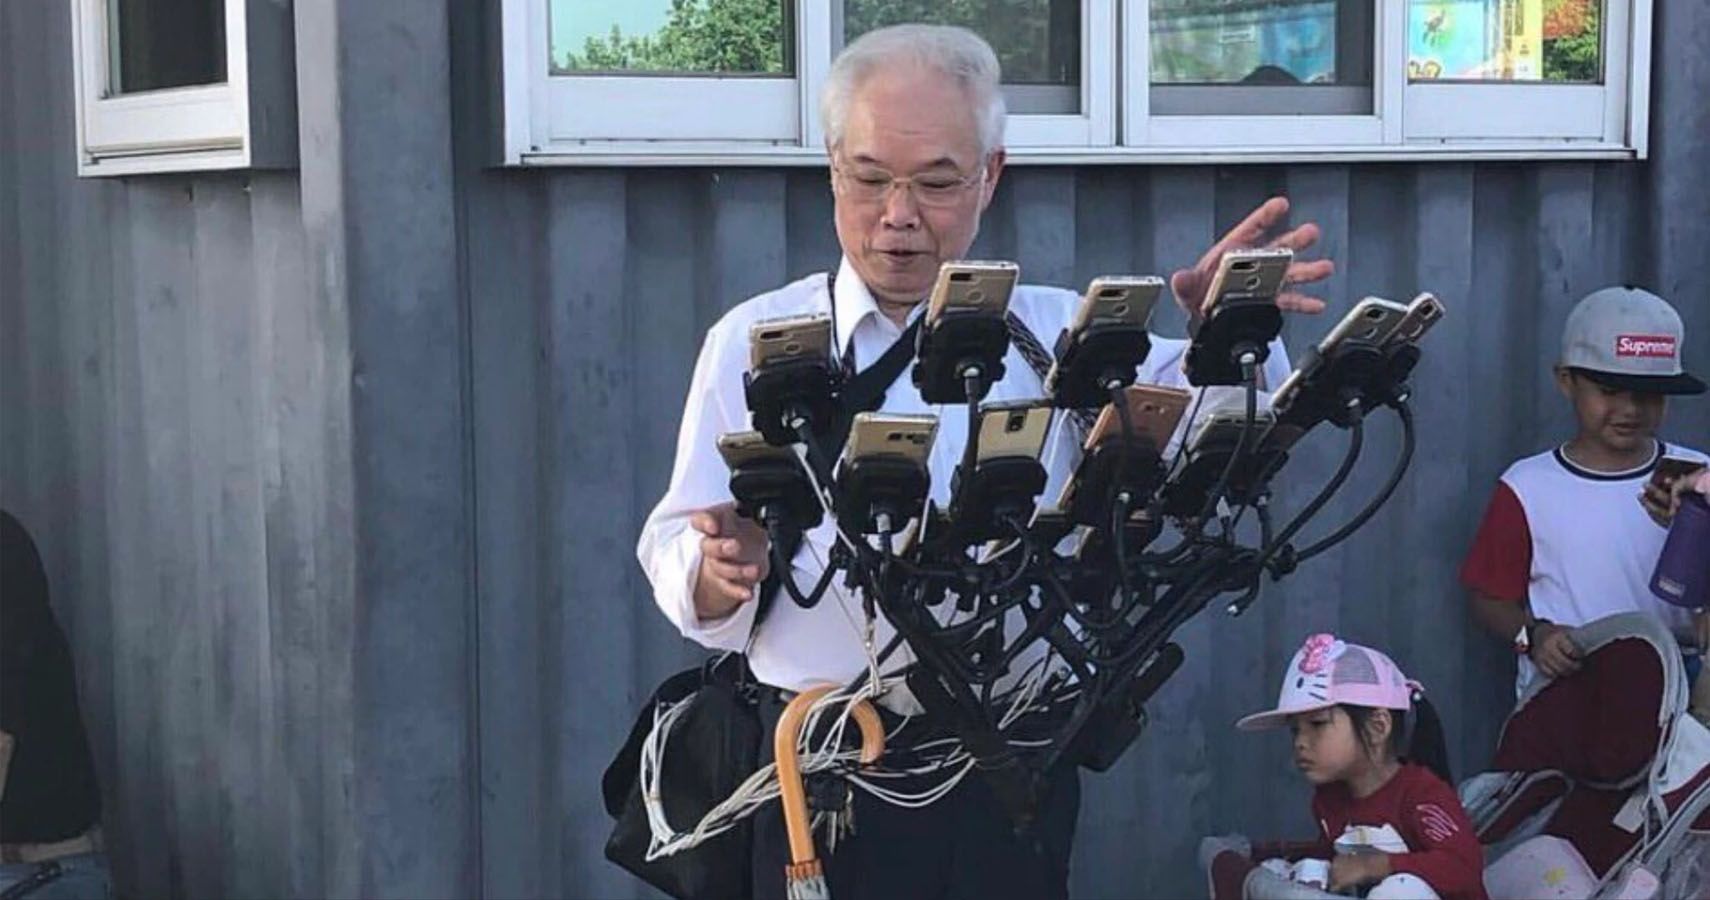 The Elderly Pokémon GO SuperPro Who Rigged 12 Smartphones To His Bicycle Has Evolved; Now Straps Them All To His Body